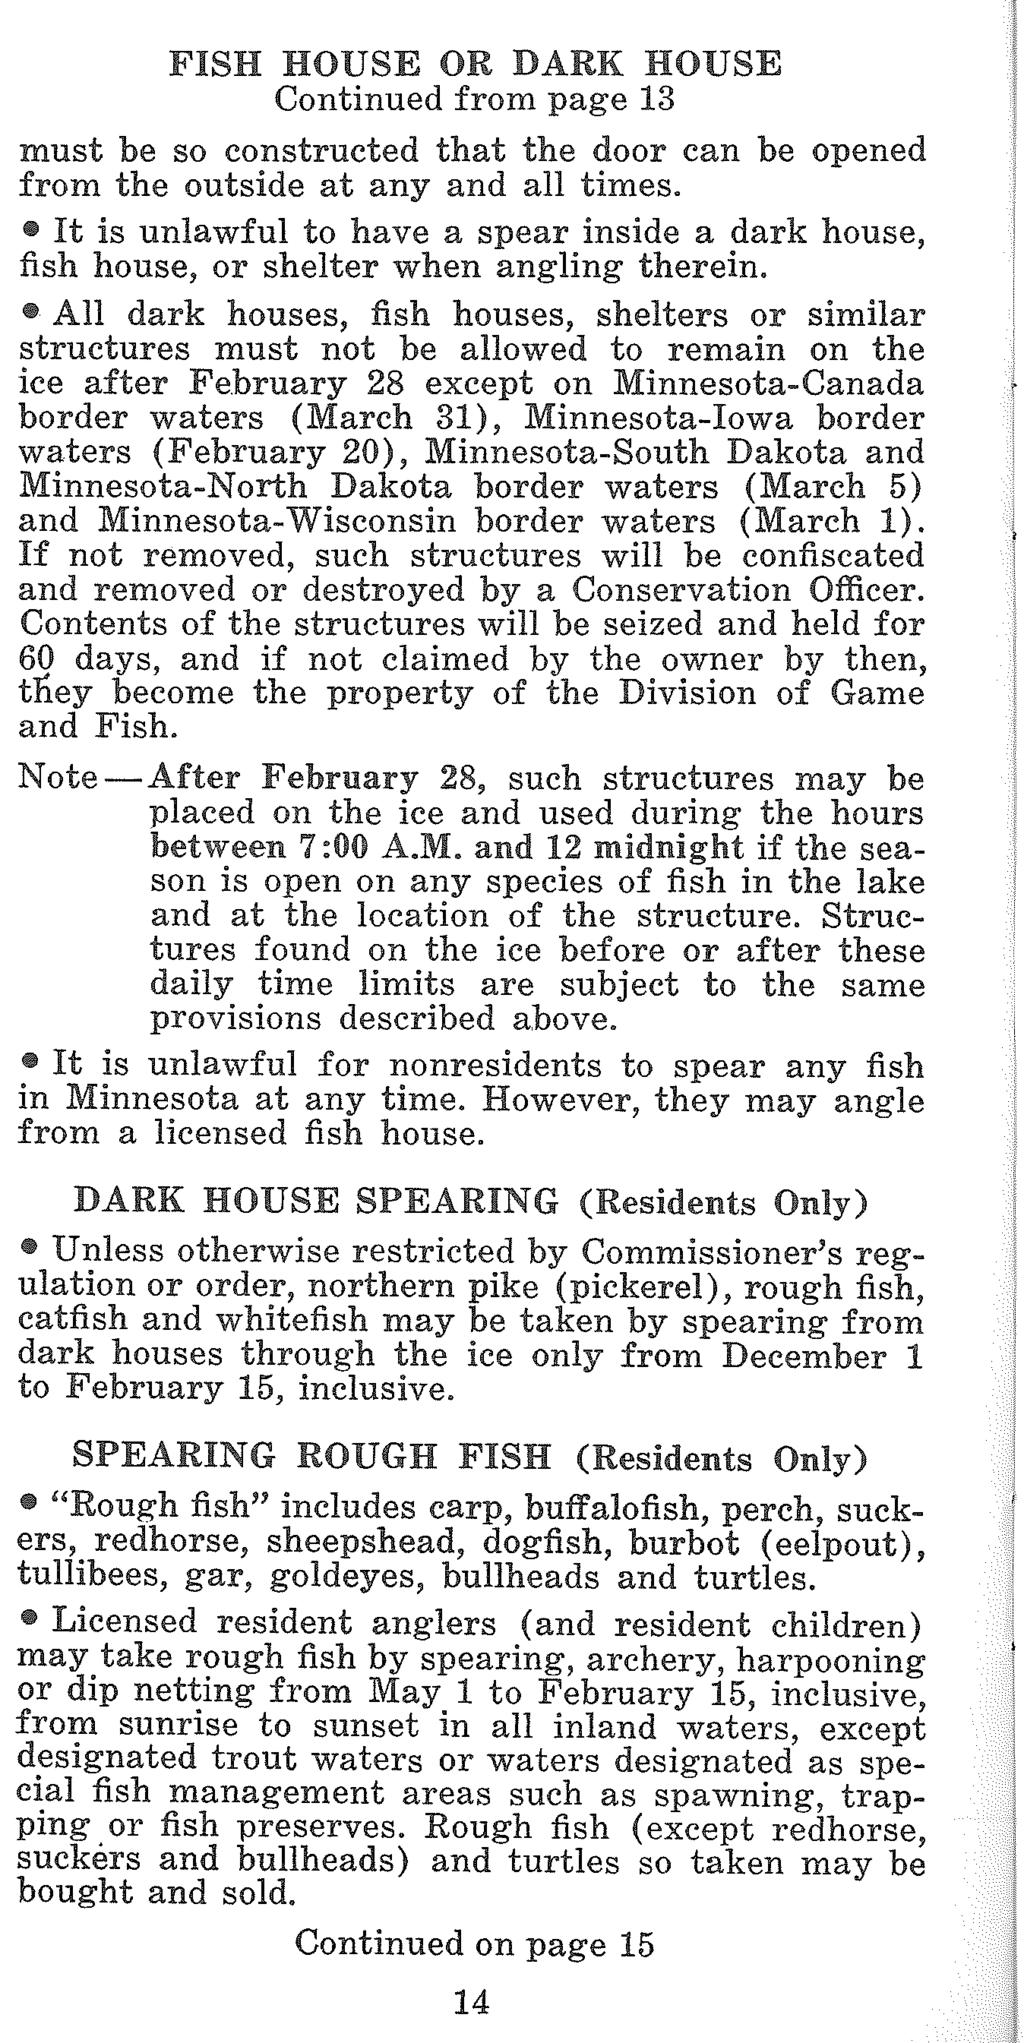 FISH HOUSE OR DARK HOUSE Continued from page 13 must be so constructed that the door can be opened from the outside at any and all times.